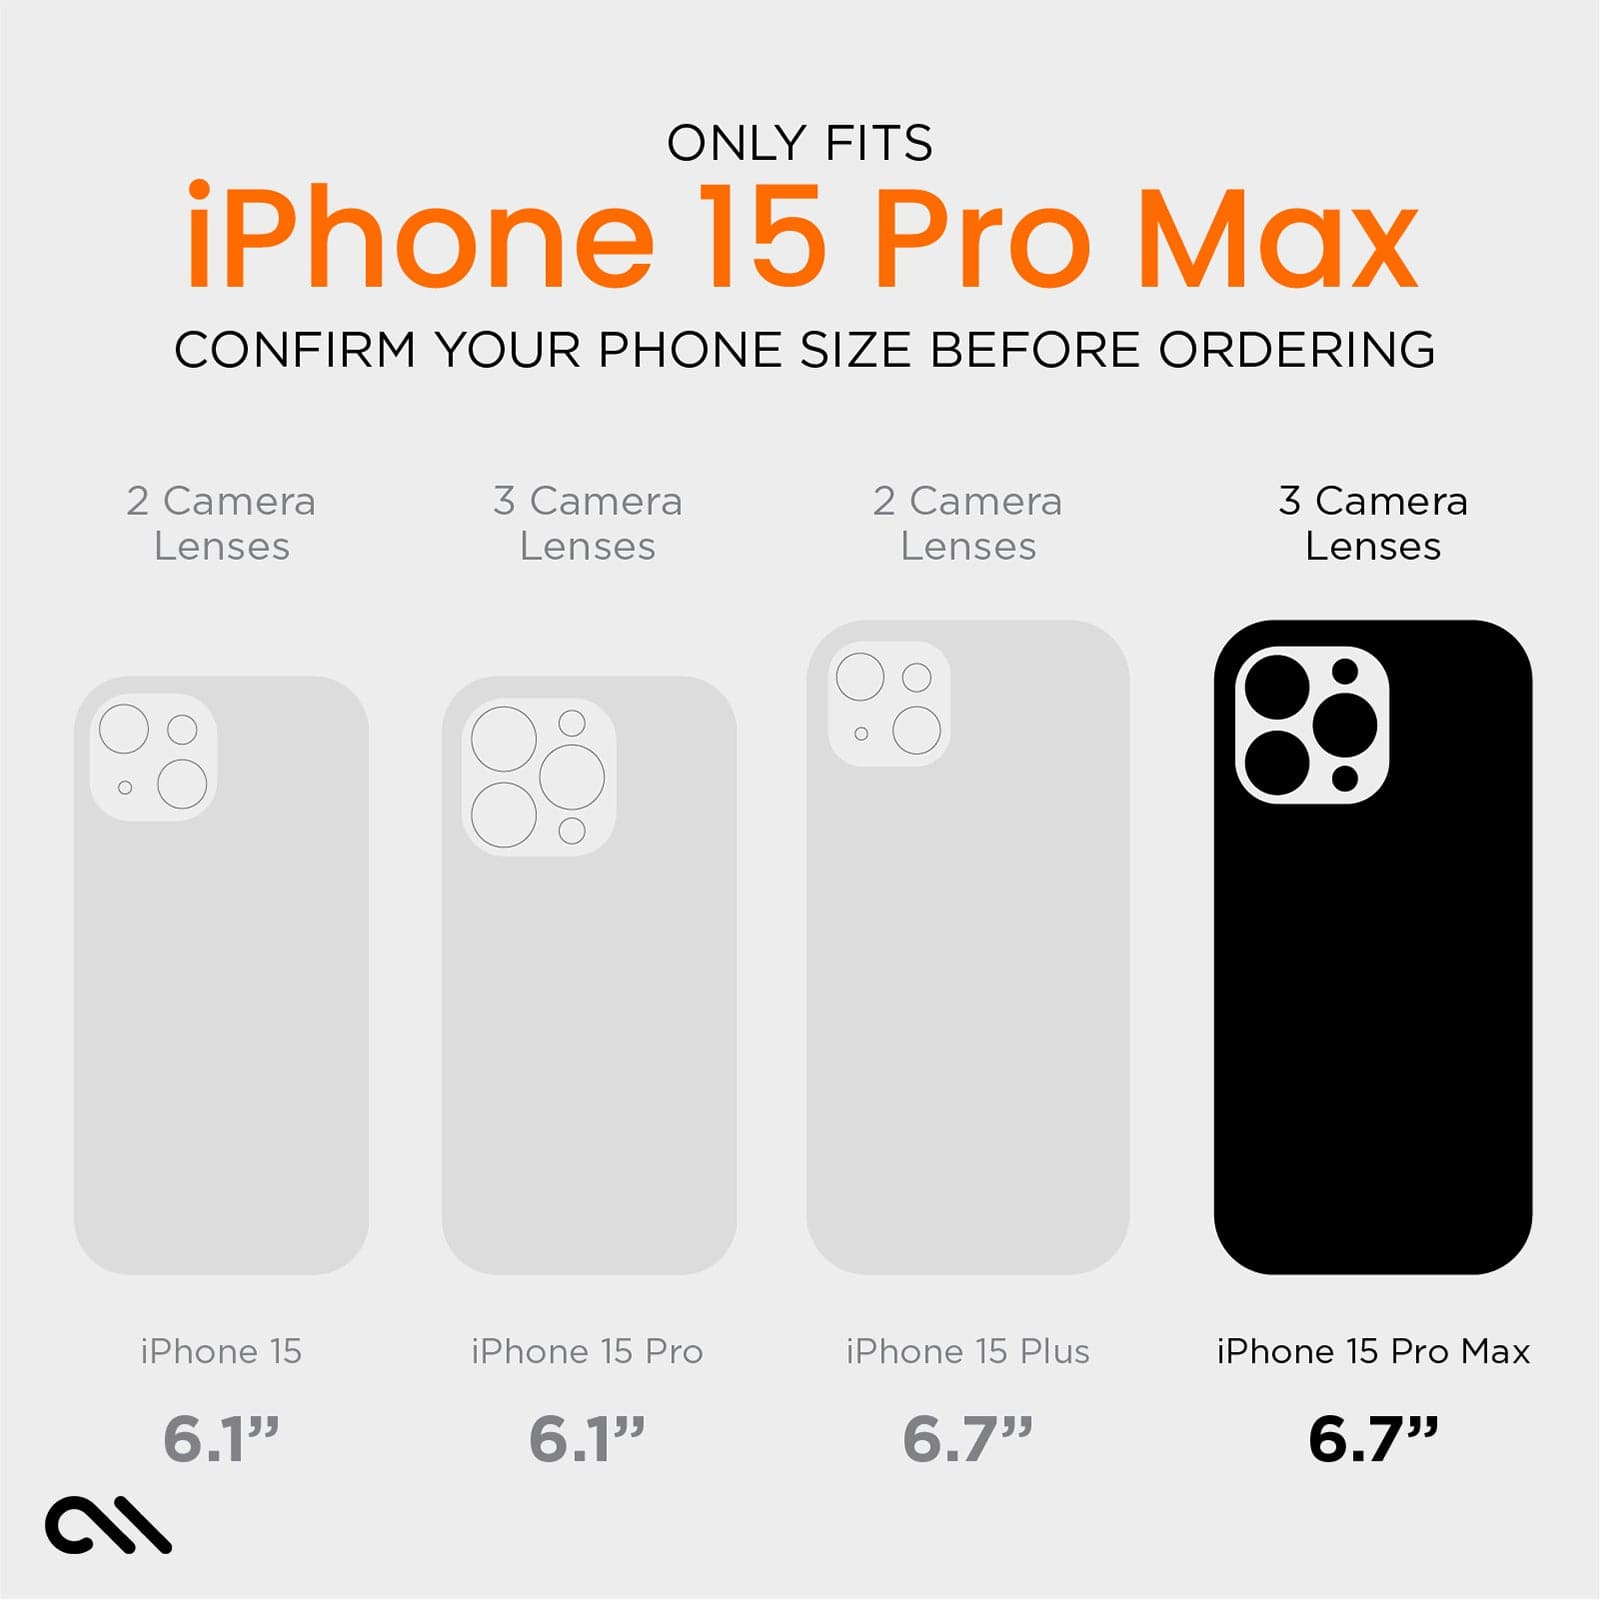 ONLY FITS IPHONE 15 PRO MAX. CONFIRM YOUR PHONE SIZE BEFORE ORDERING